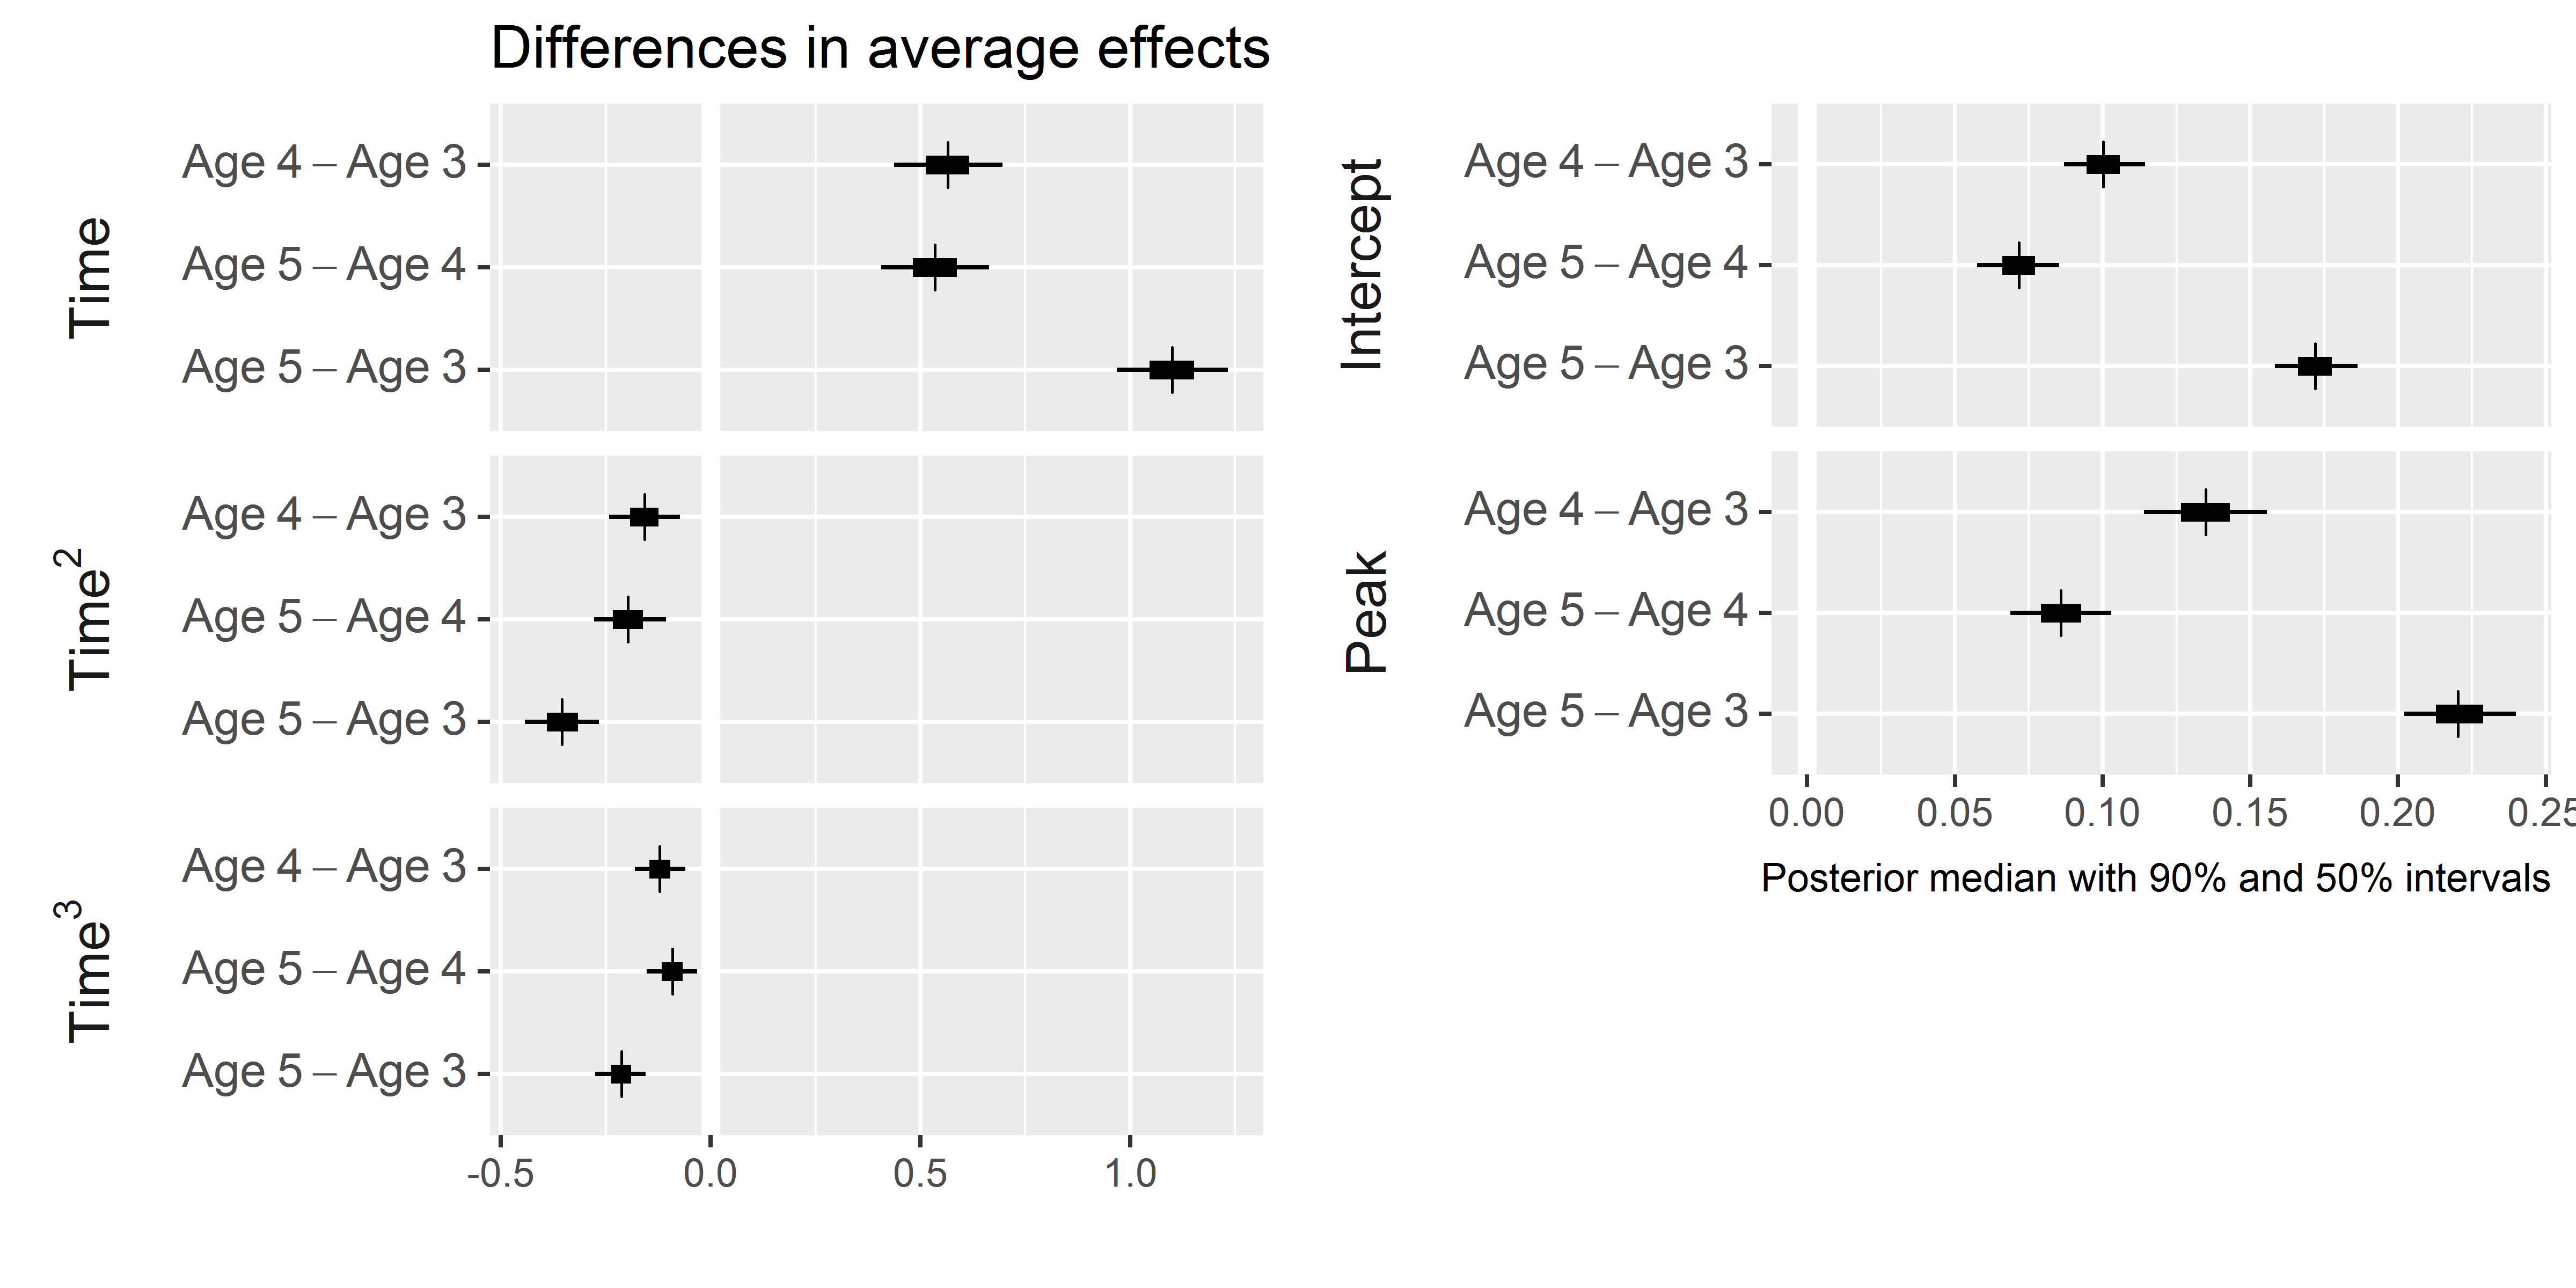 Uncertainty intervals for the differences in growth curve features between ages. Again, the intercept and peak features were converted to proportions.